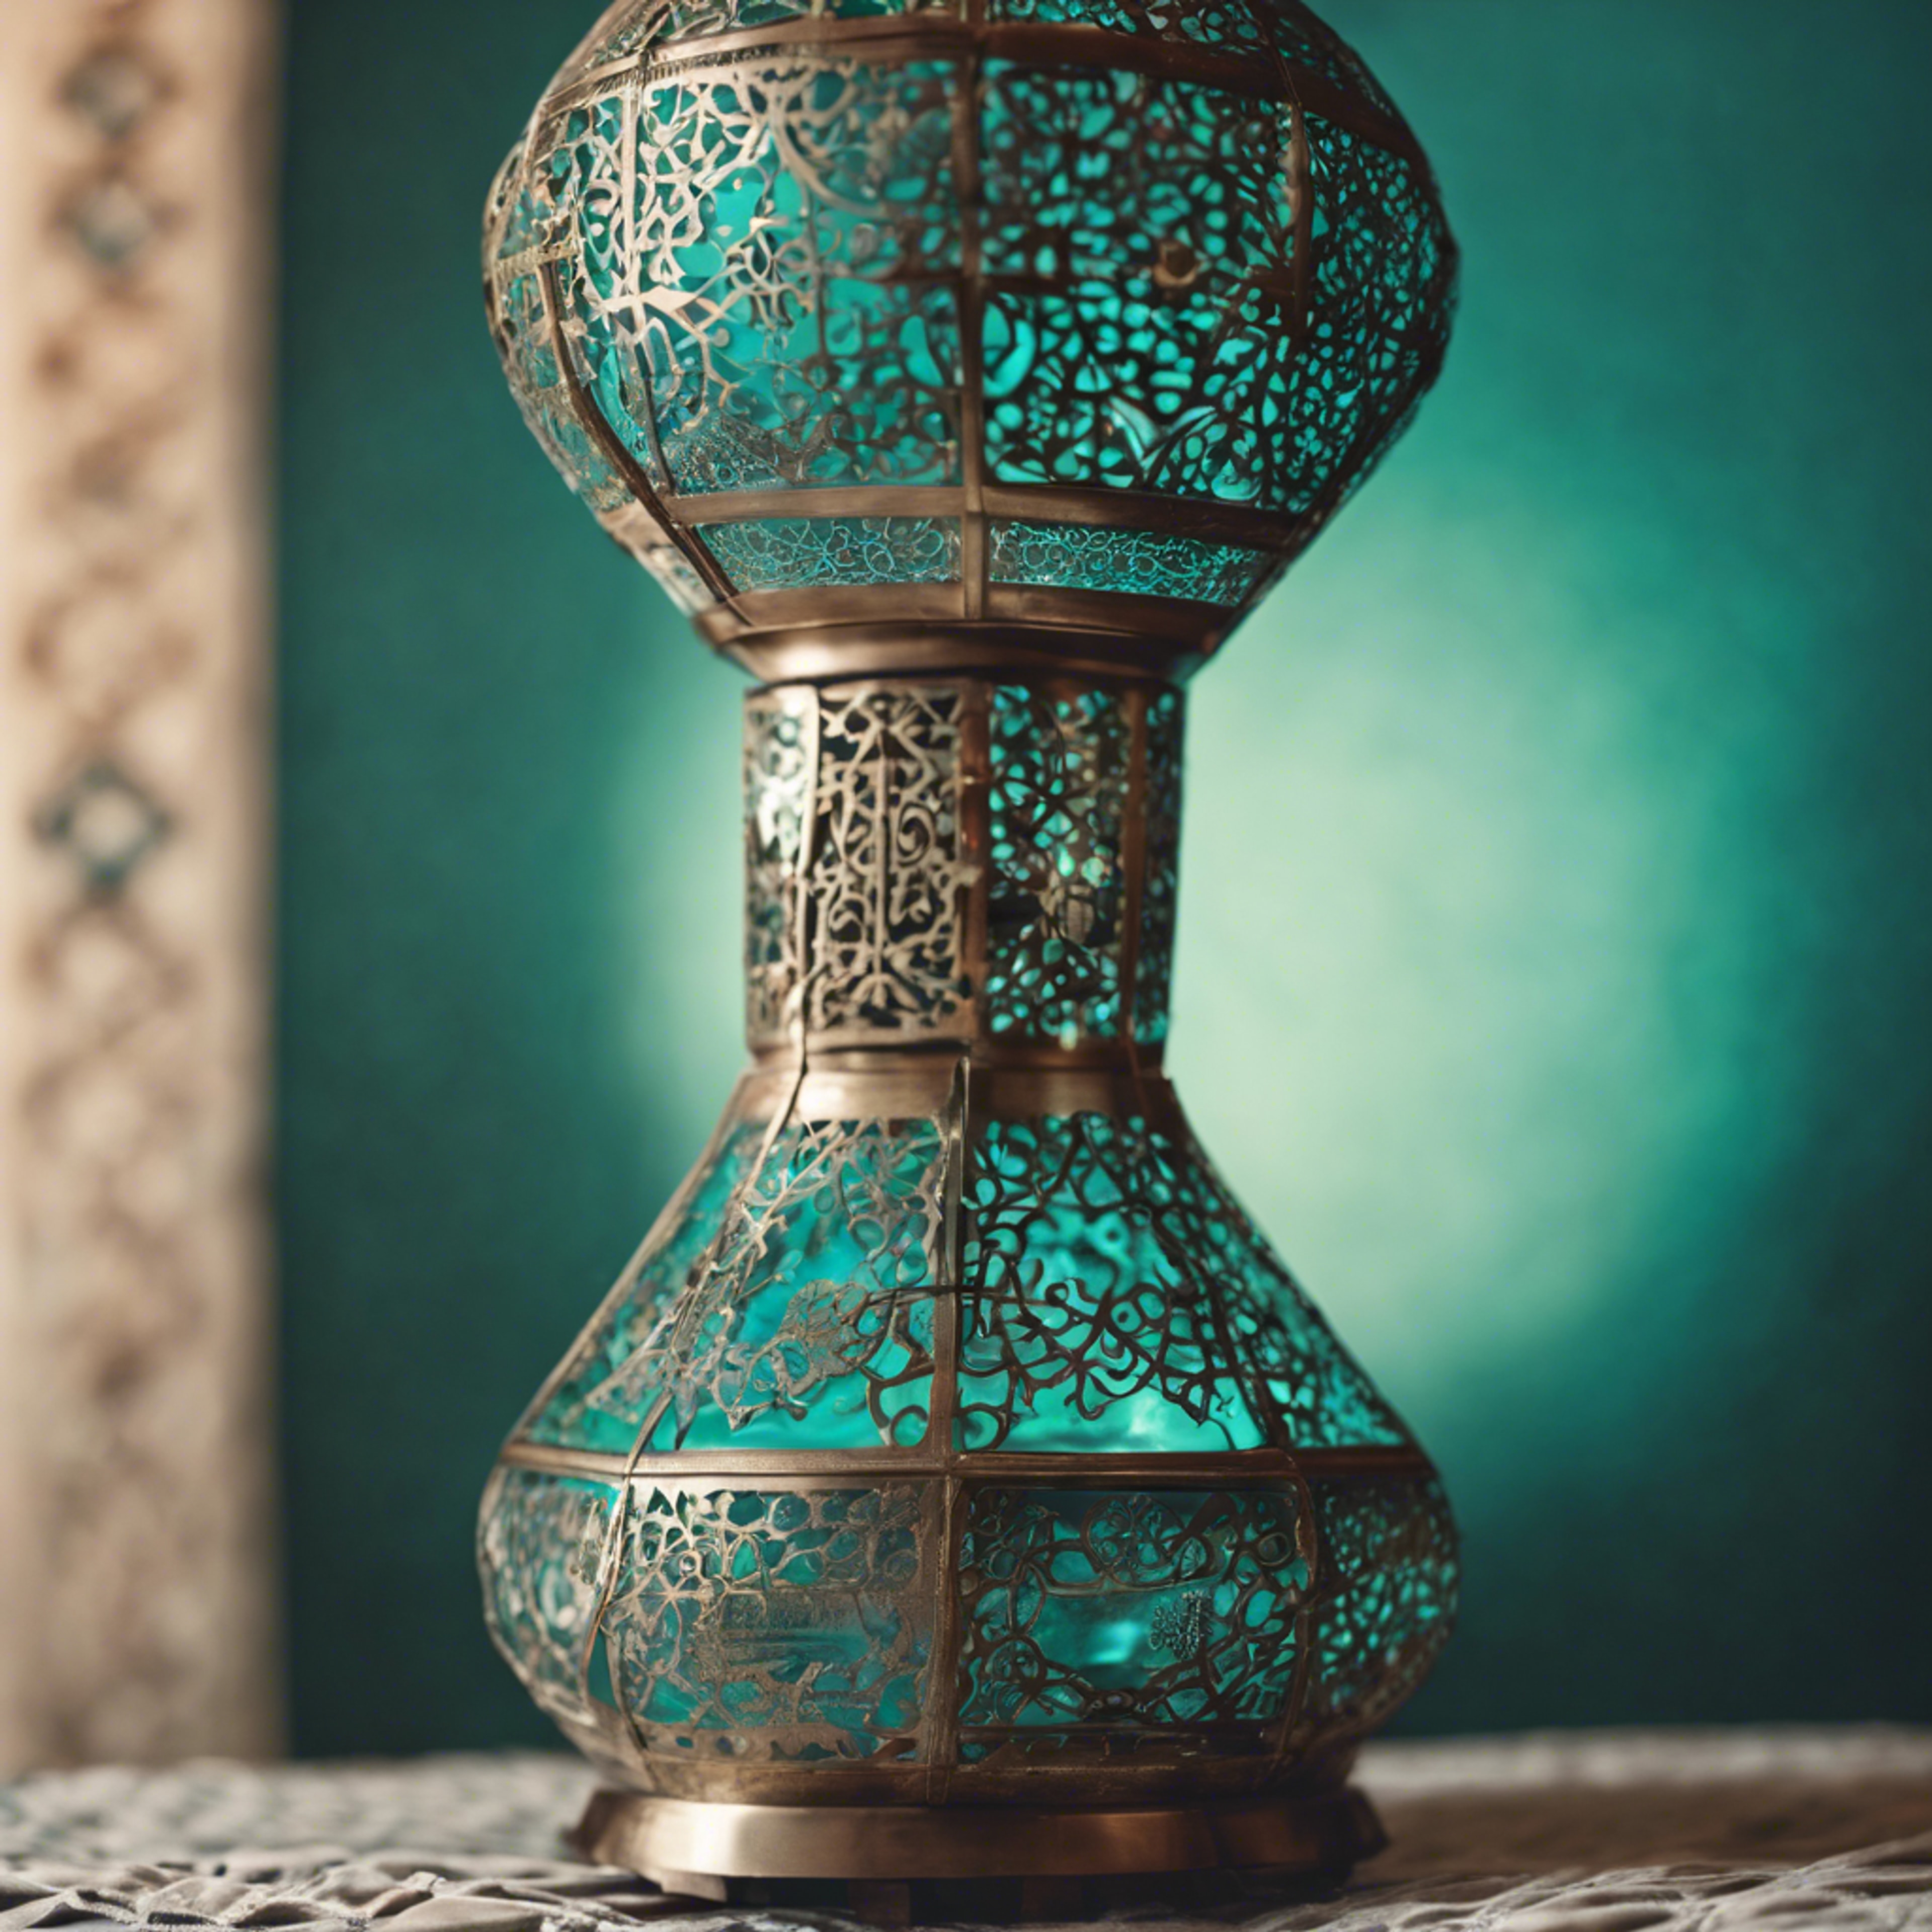 A traditional Moroccan lamp in a cool teal color. Tapet[a27f0371dbce4744aca5]